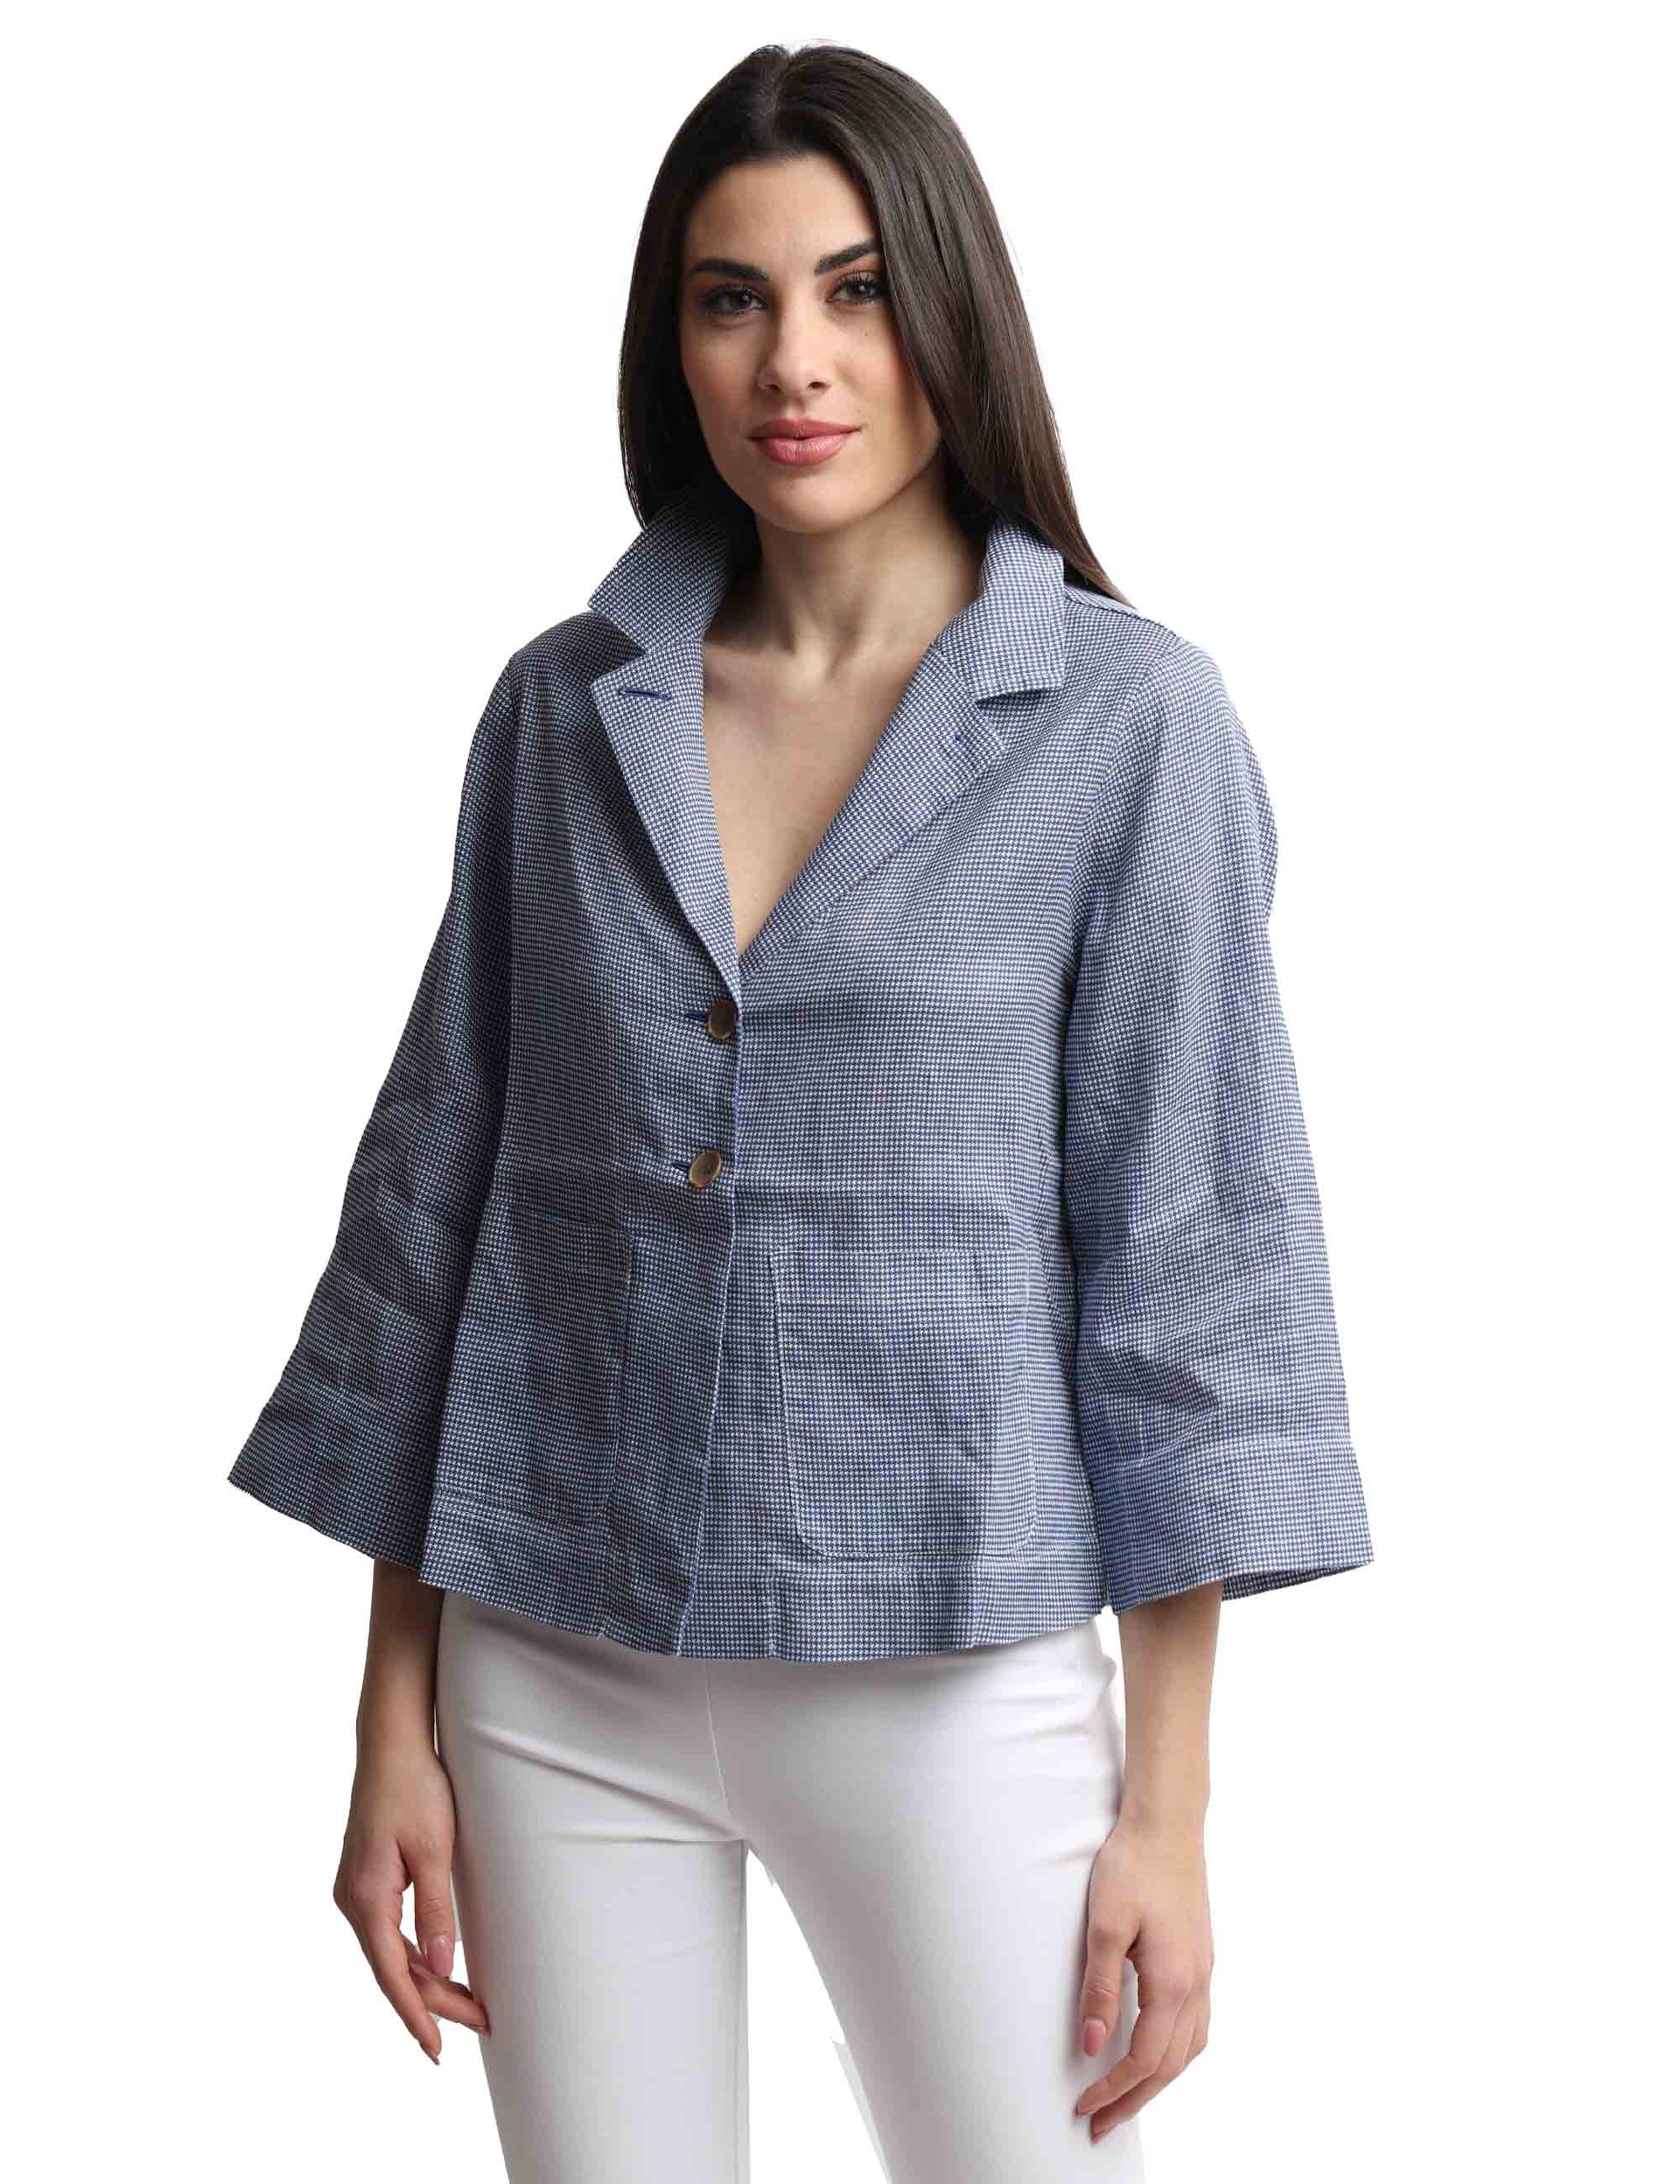 Single-breasted women's jackets in blue linen with 3/4 sleeves